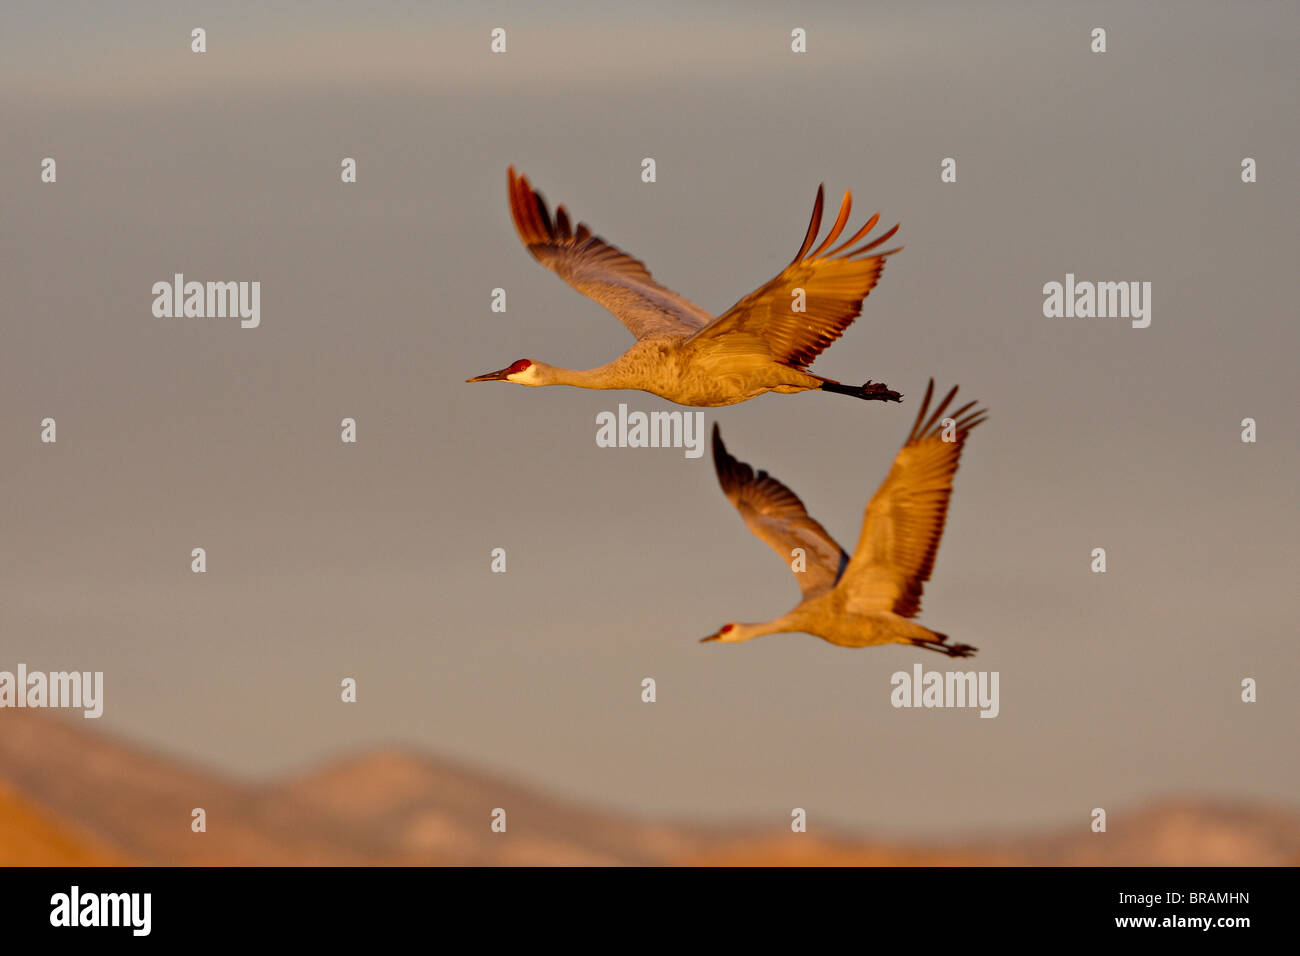 Two Sandhill Cranes in flight in early morning light, Bosque Del Apache National Wildlife Refuge, New Mexico, USA Stock Photo